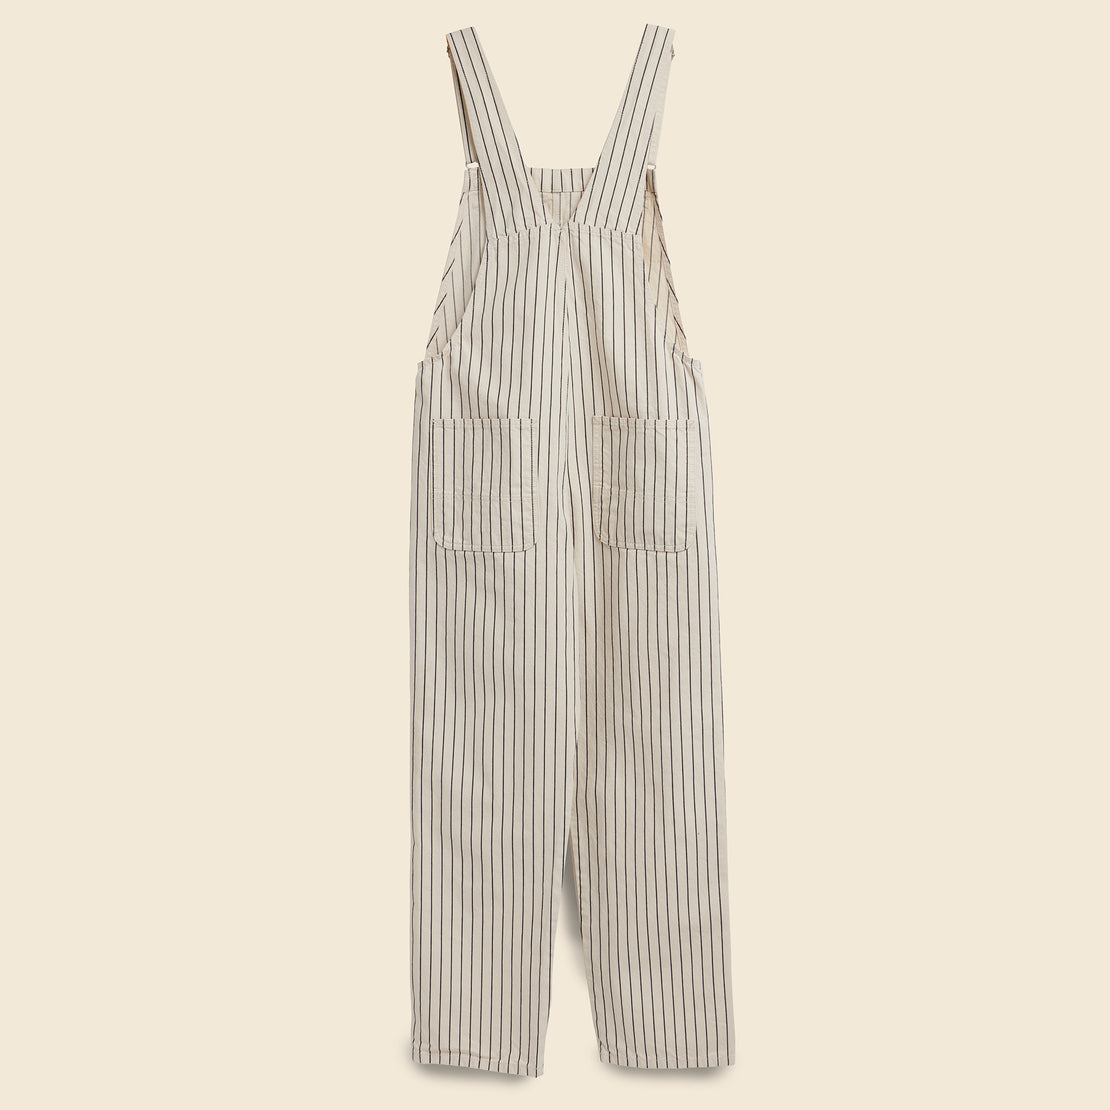 Trade Overall - Wax/Black - Carhartt WIP - STAG Provisions - W - Onepiece - Overalls